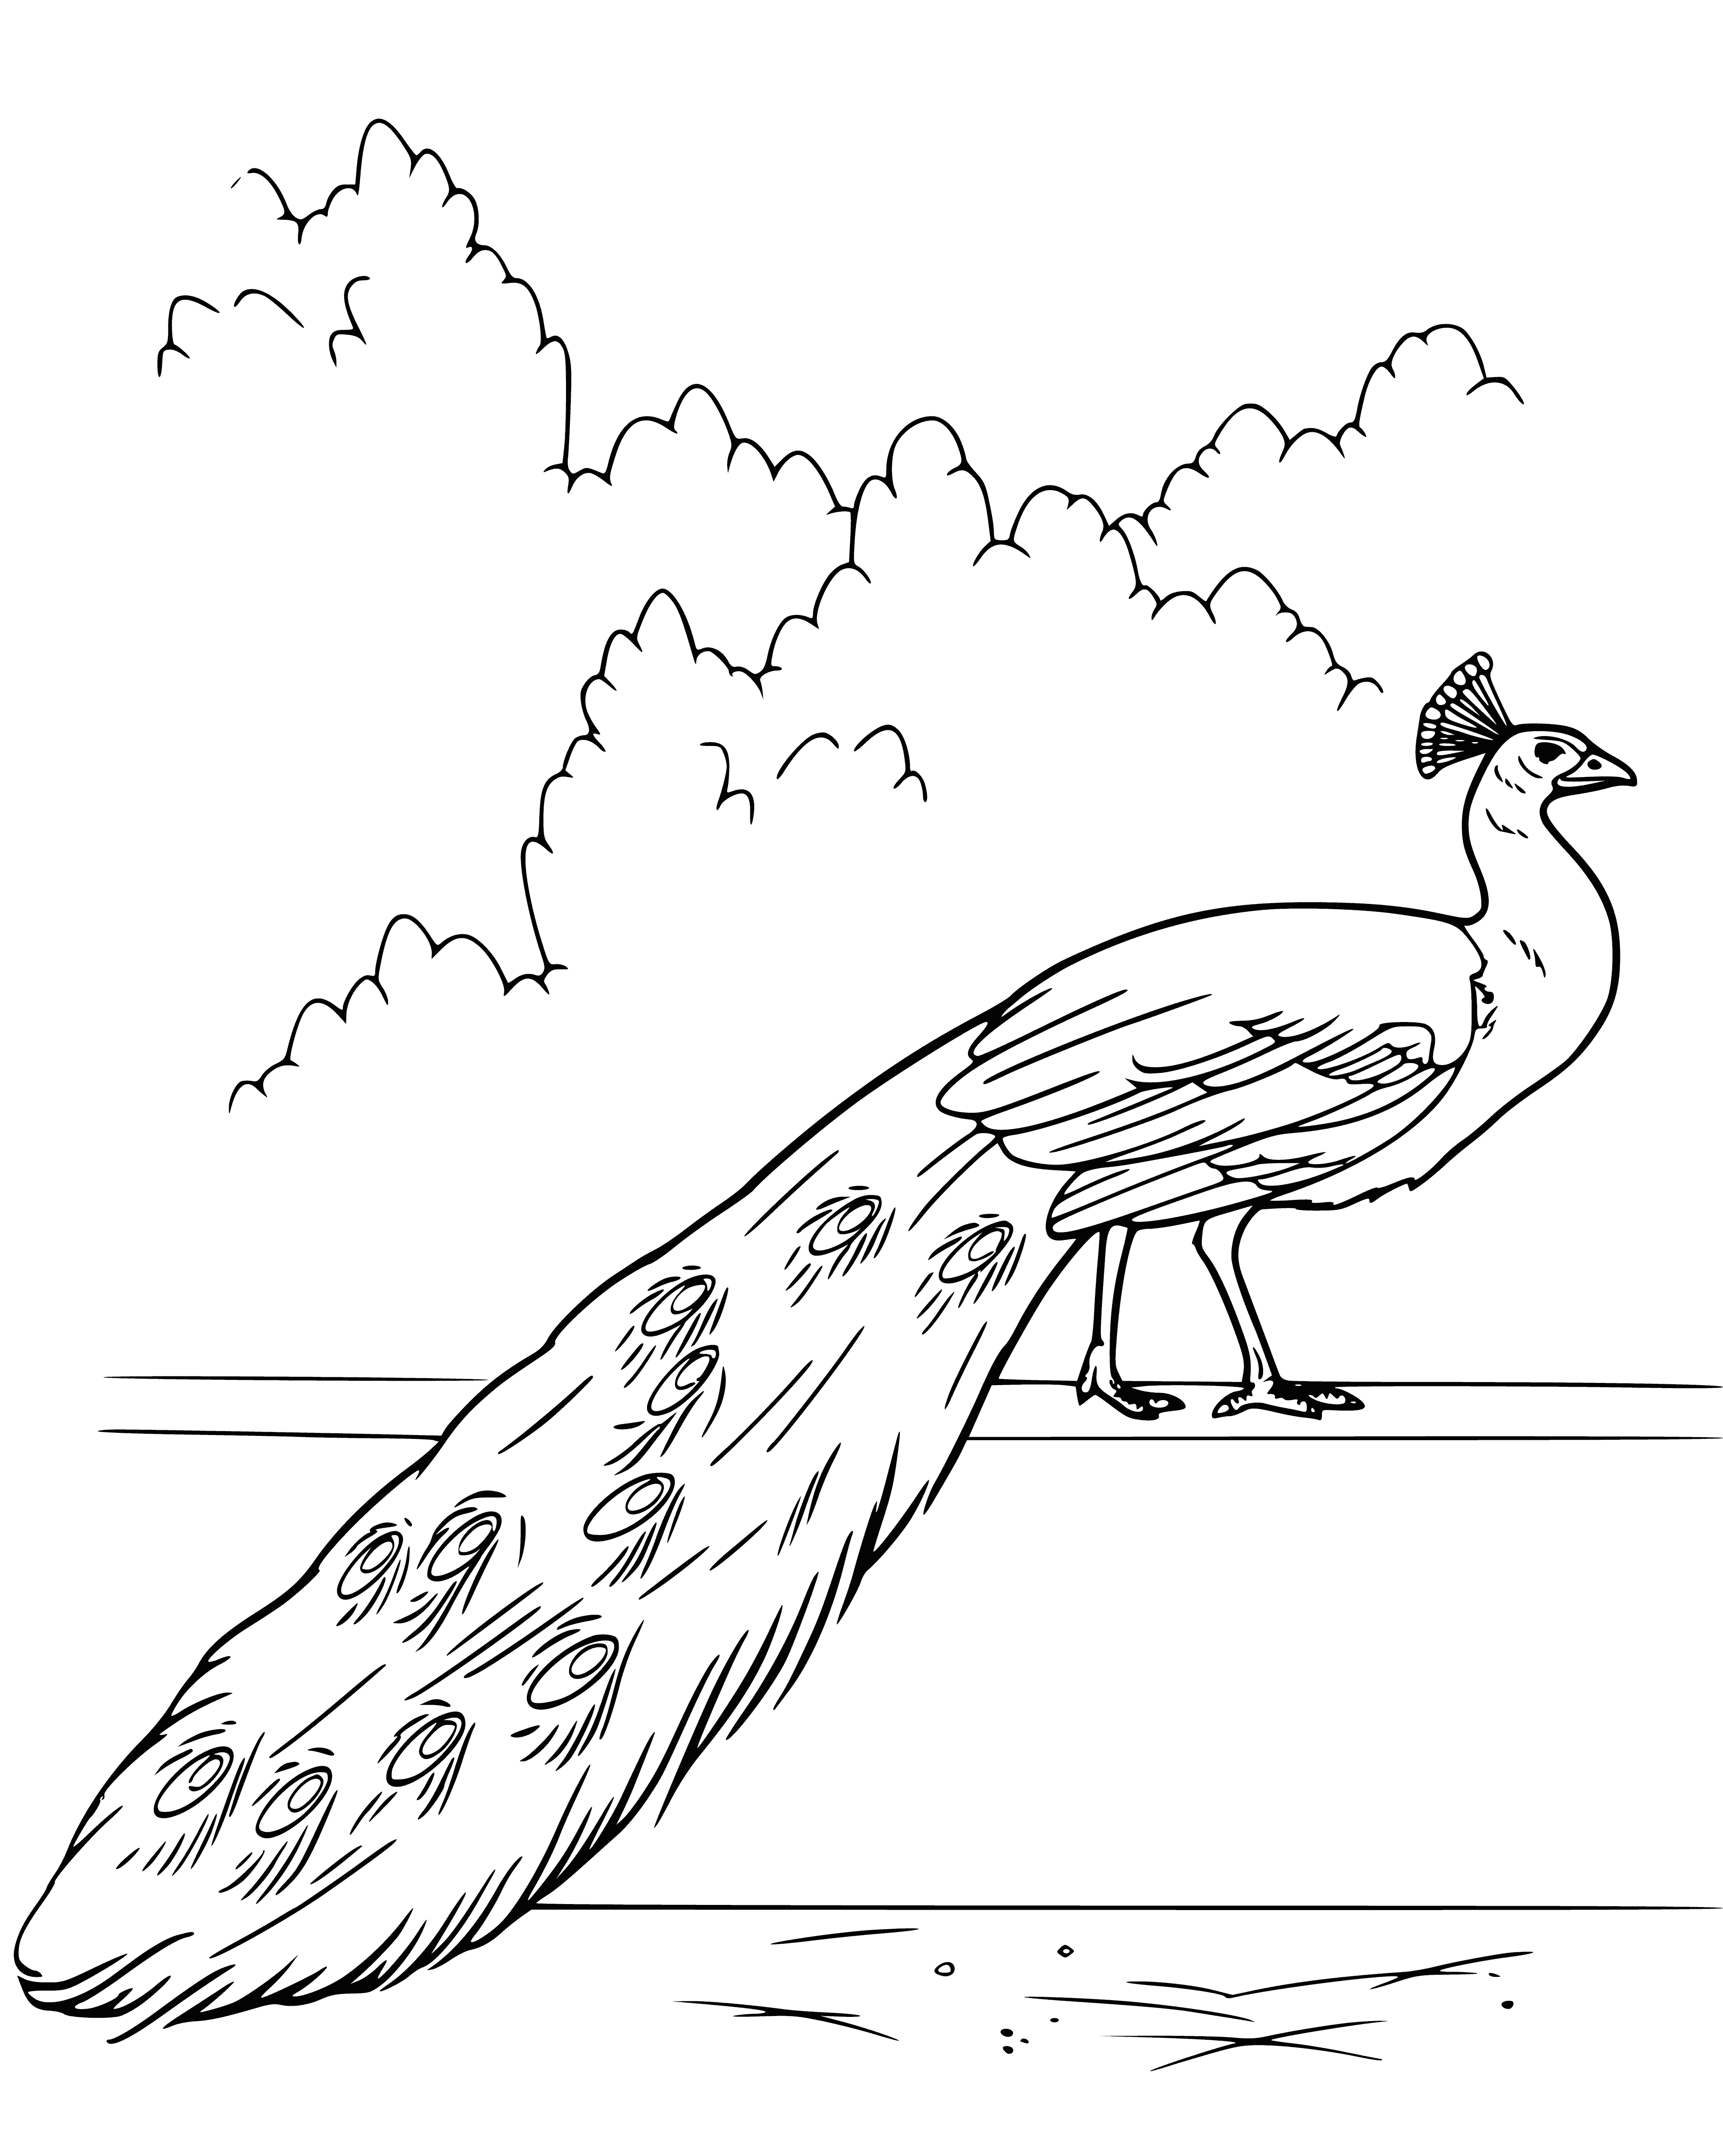 coloring page: A peacock is a brightly colored bird w/ long tail, neck, & big beak. Tail is big & fluffy, standing on a branch.